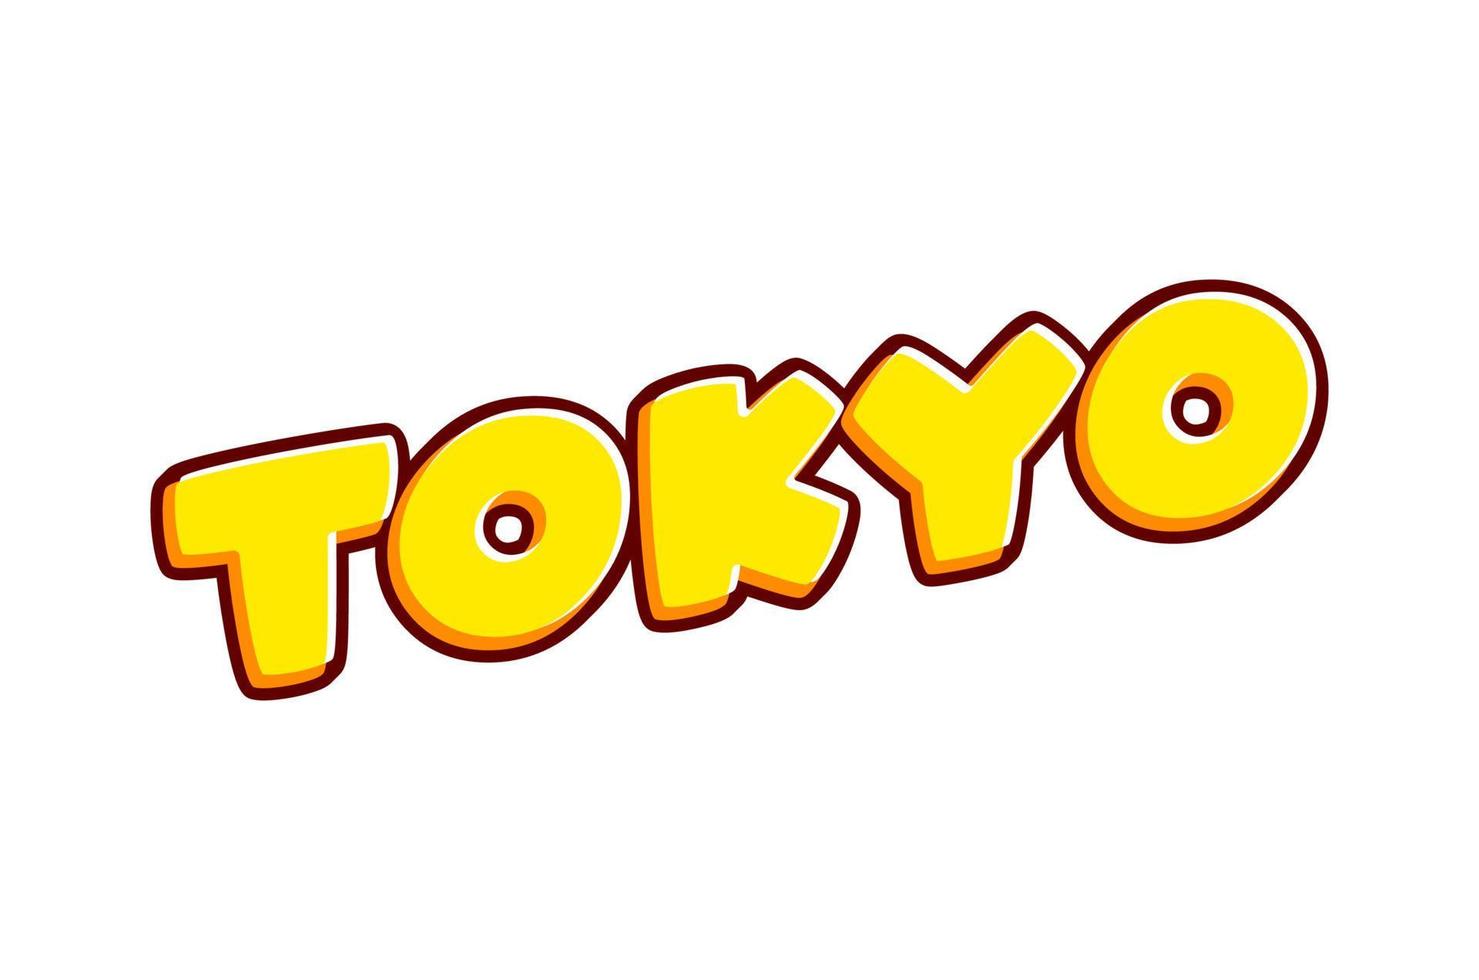 Tokyo city. Capital of Japan lettering isolated on white colourful text effect design vector. Text or inscriptions in English. The modern and creative design has red, orange, yellow colors. vector